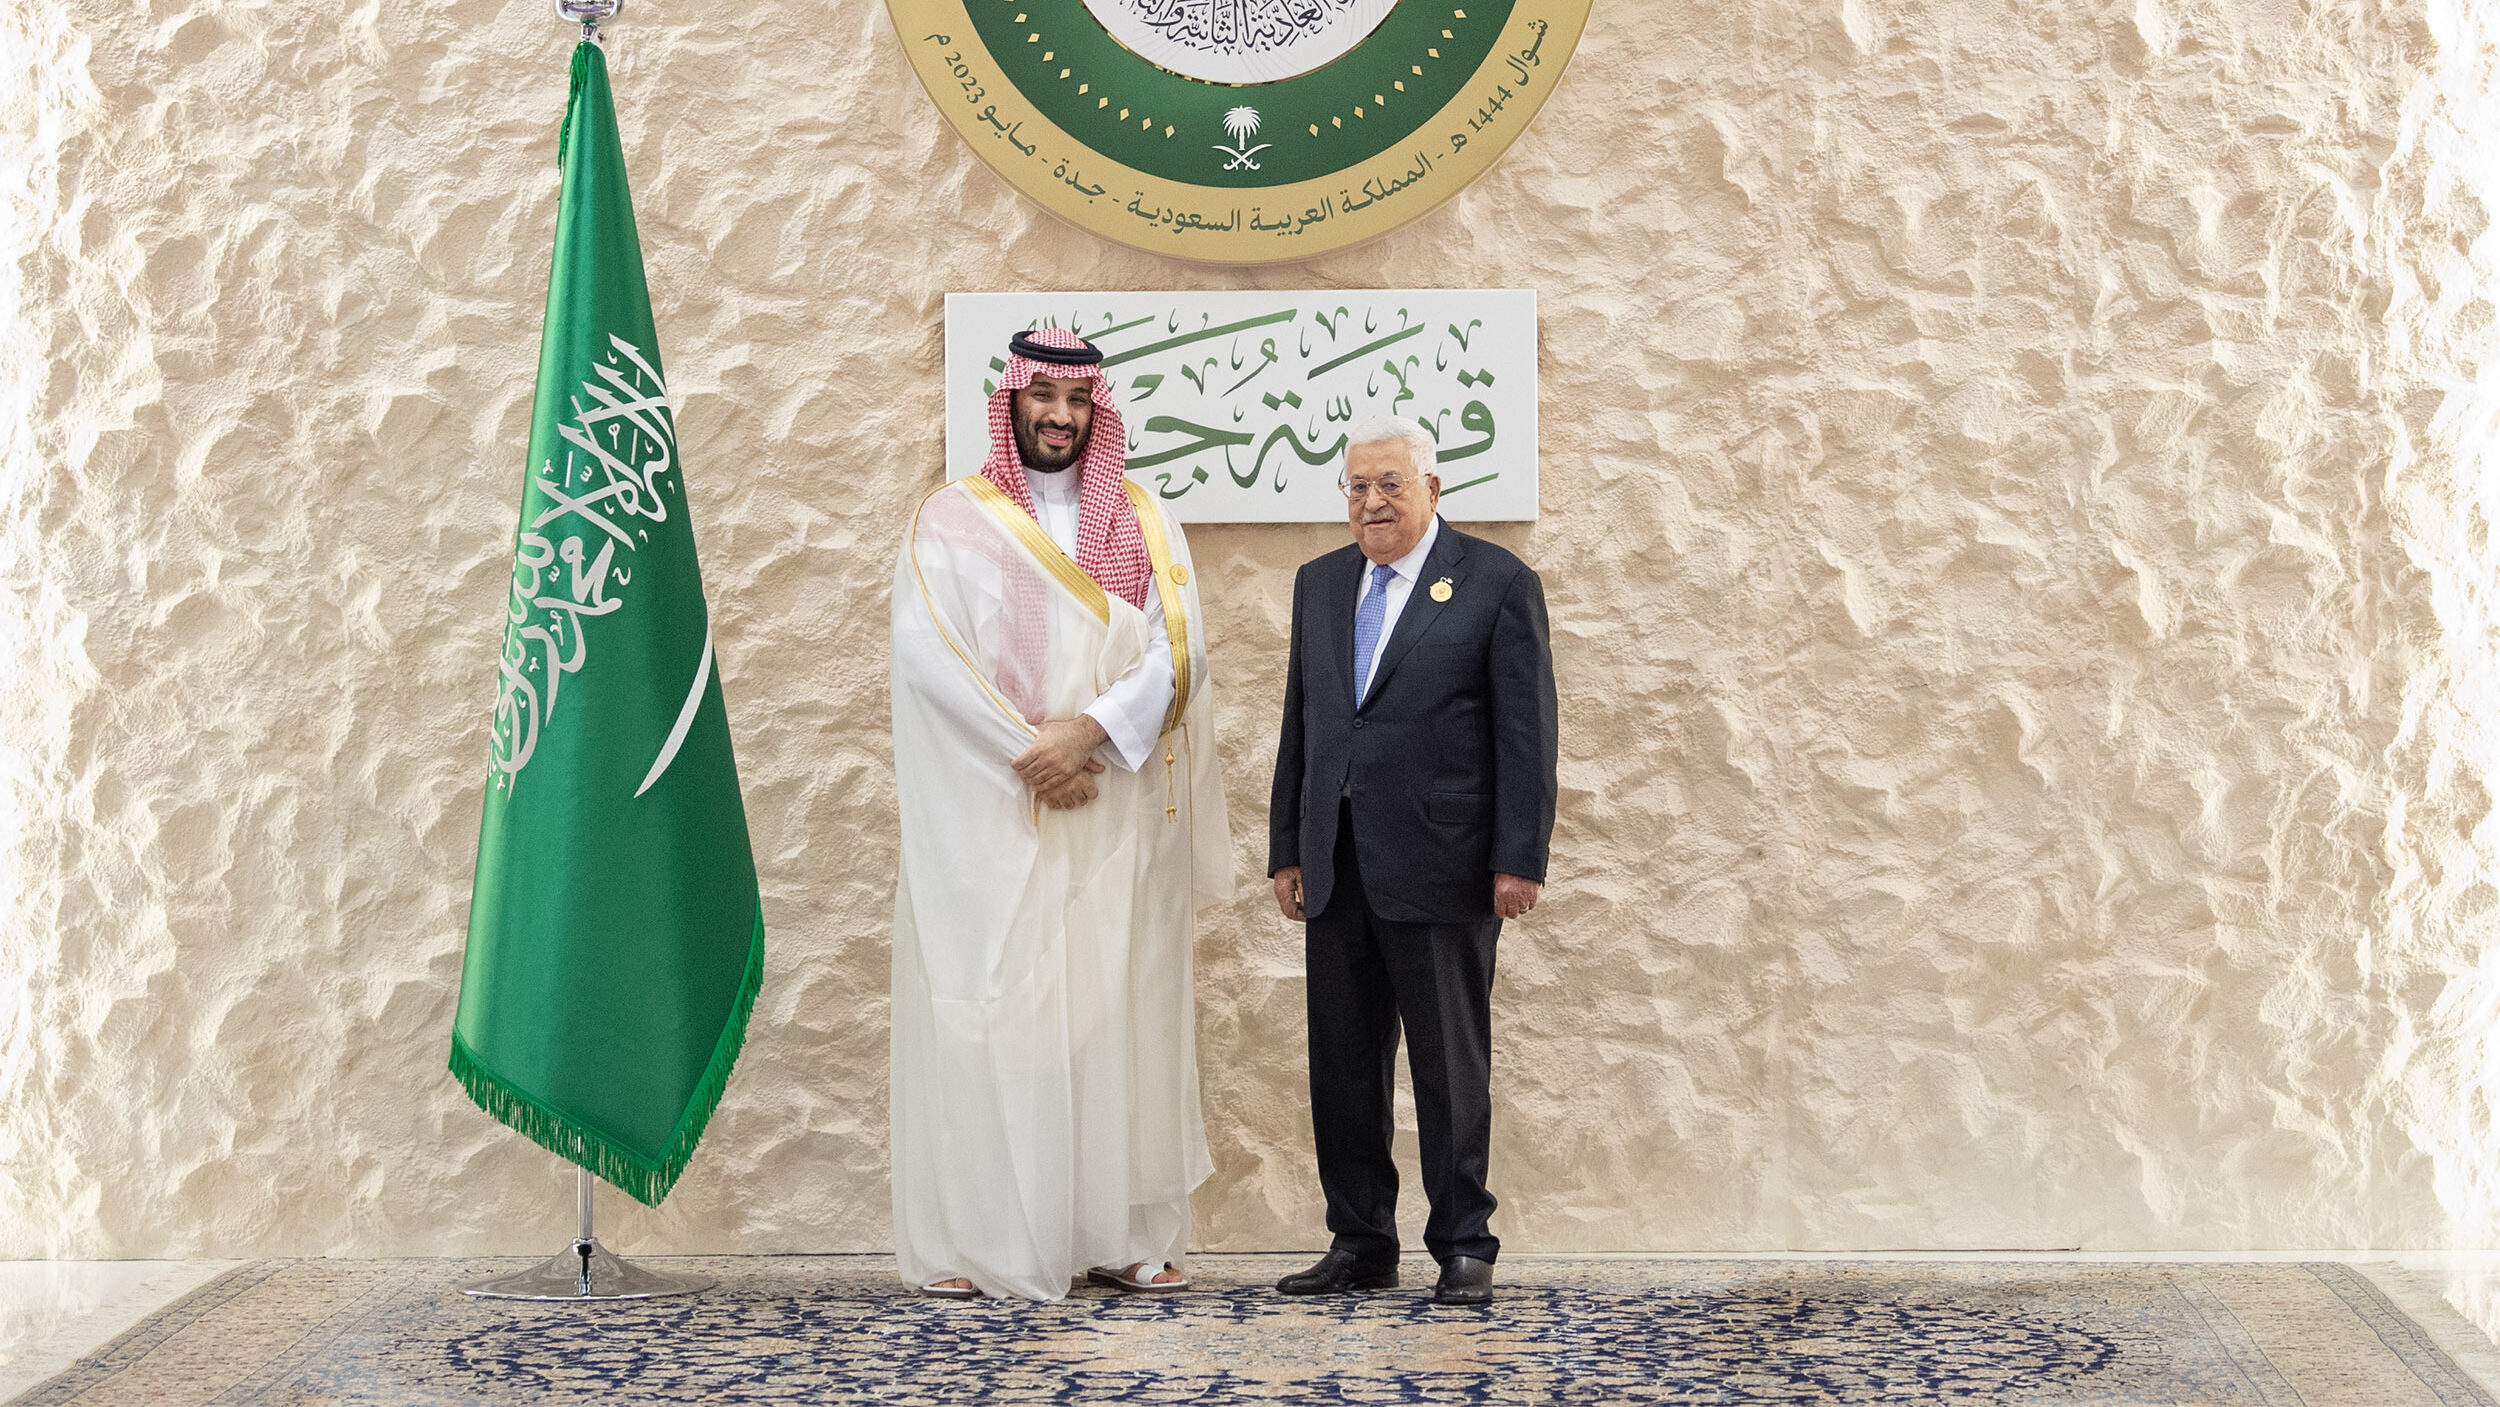 Reports: Saudis Offer To Restore Aid to PA Ahead of Potential Deal With Israel